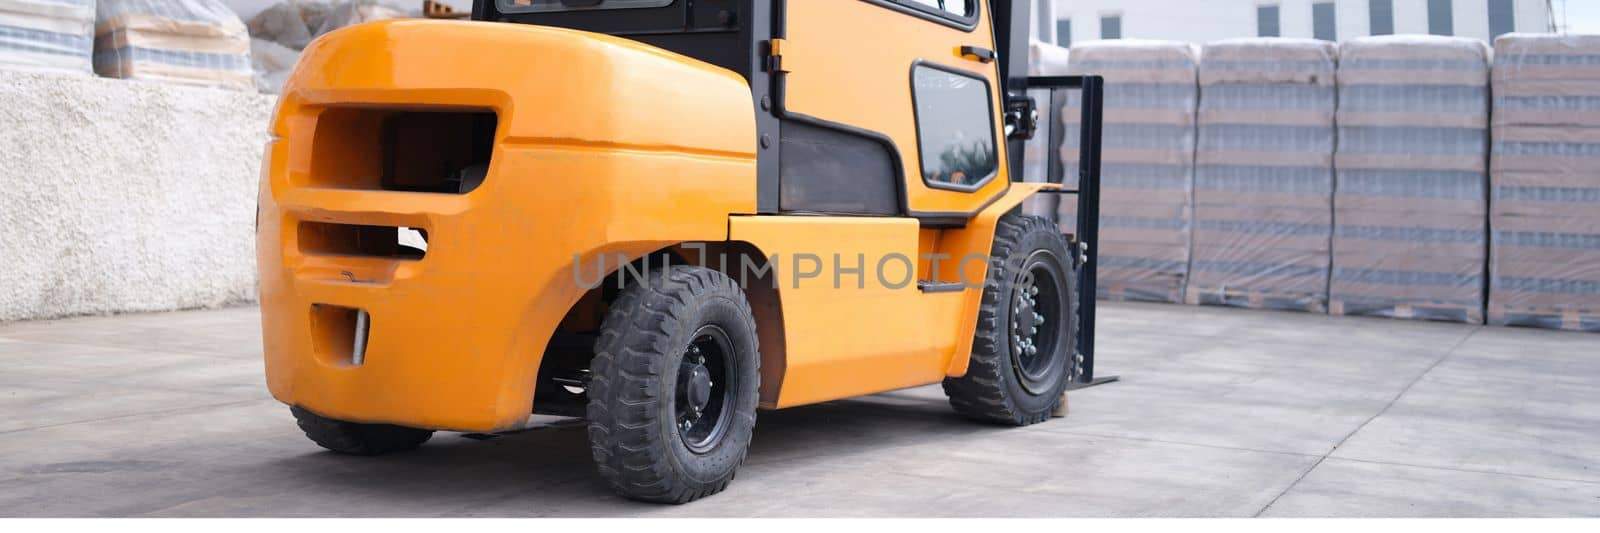 Reliable yellow forklift in warehouse. Worker ready to load pallets with skid steer loader concept